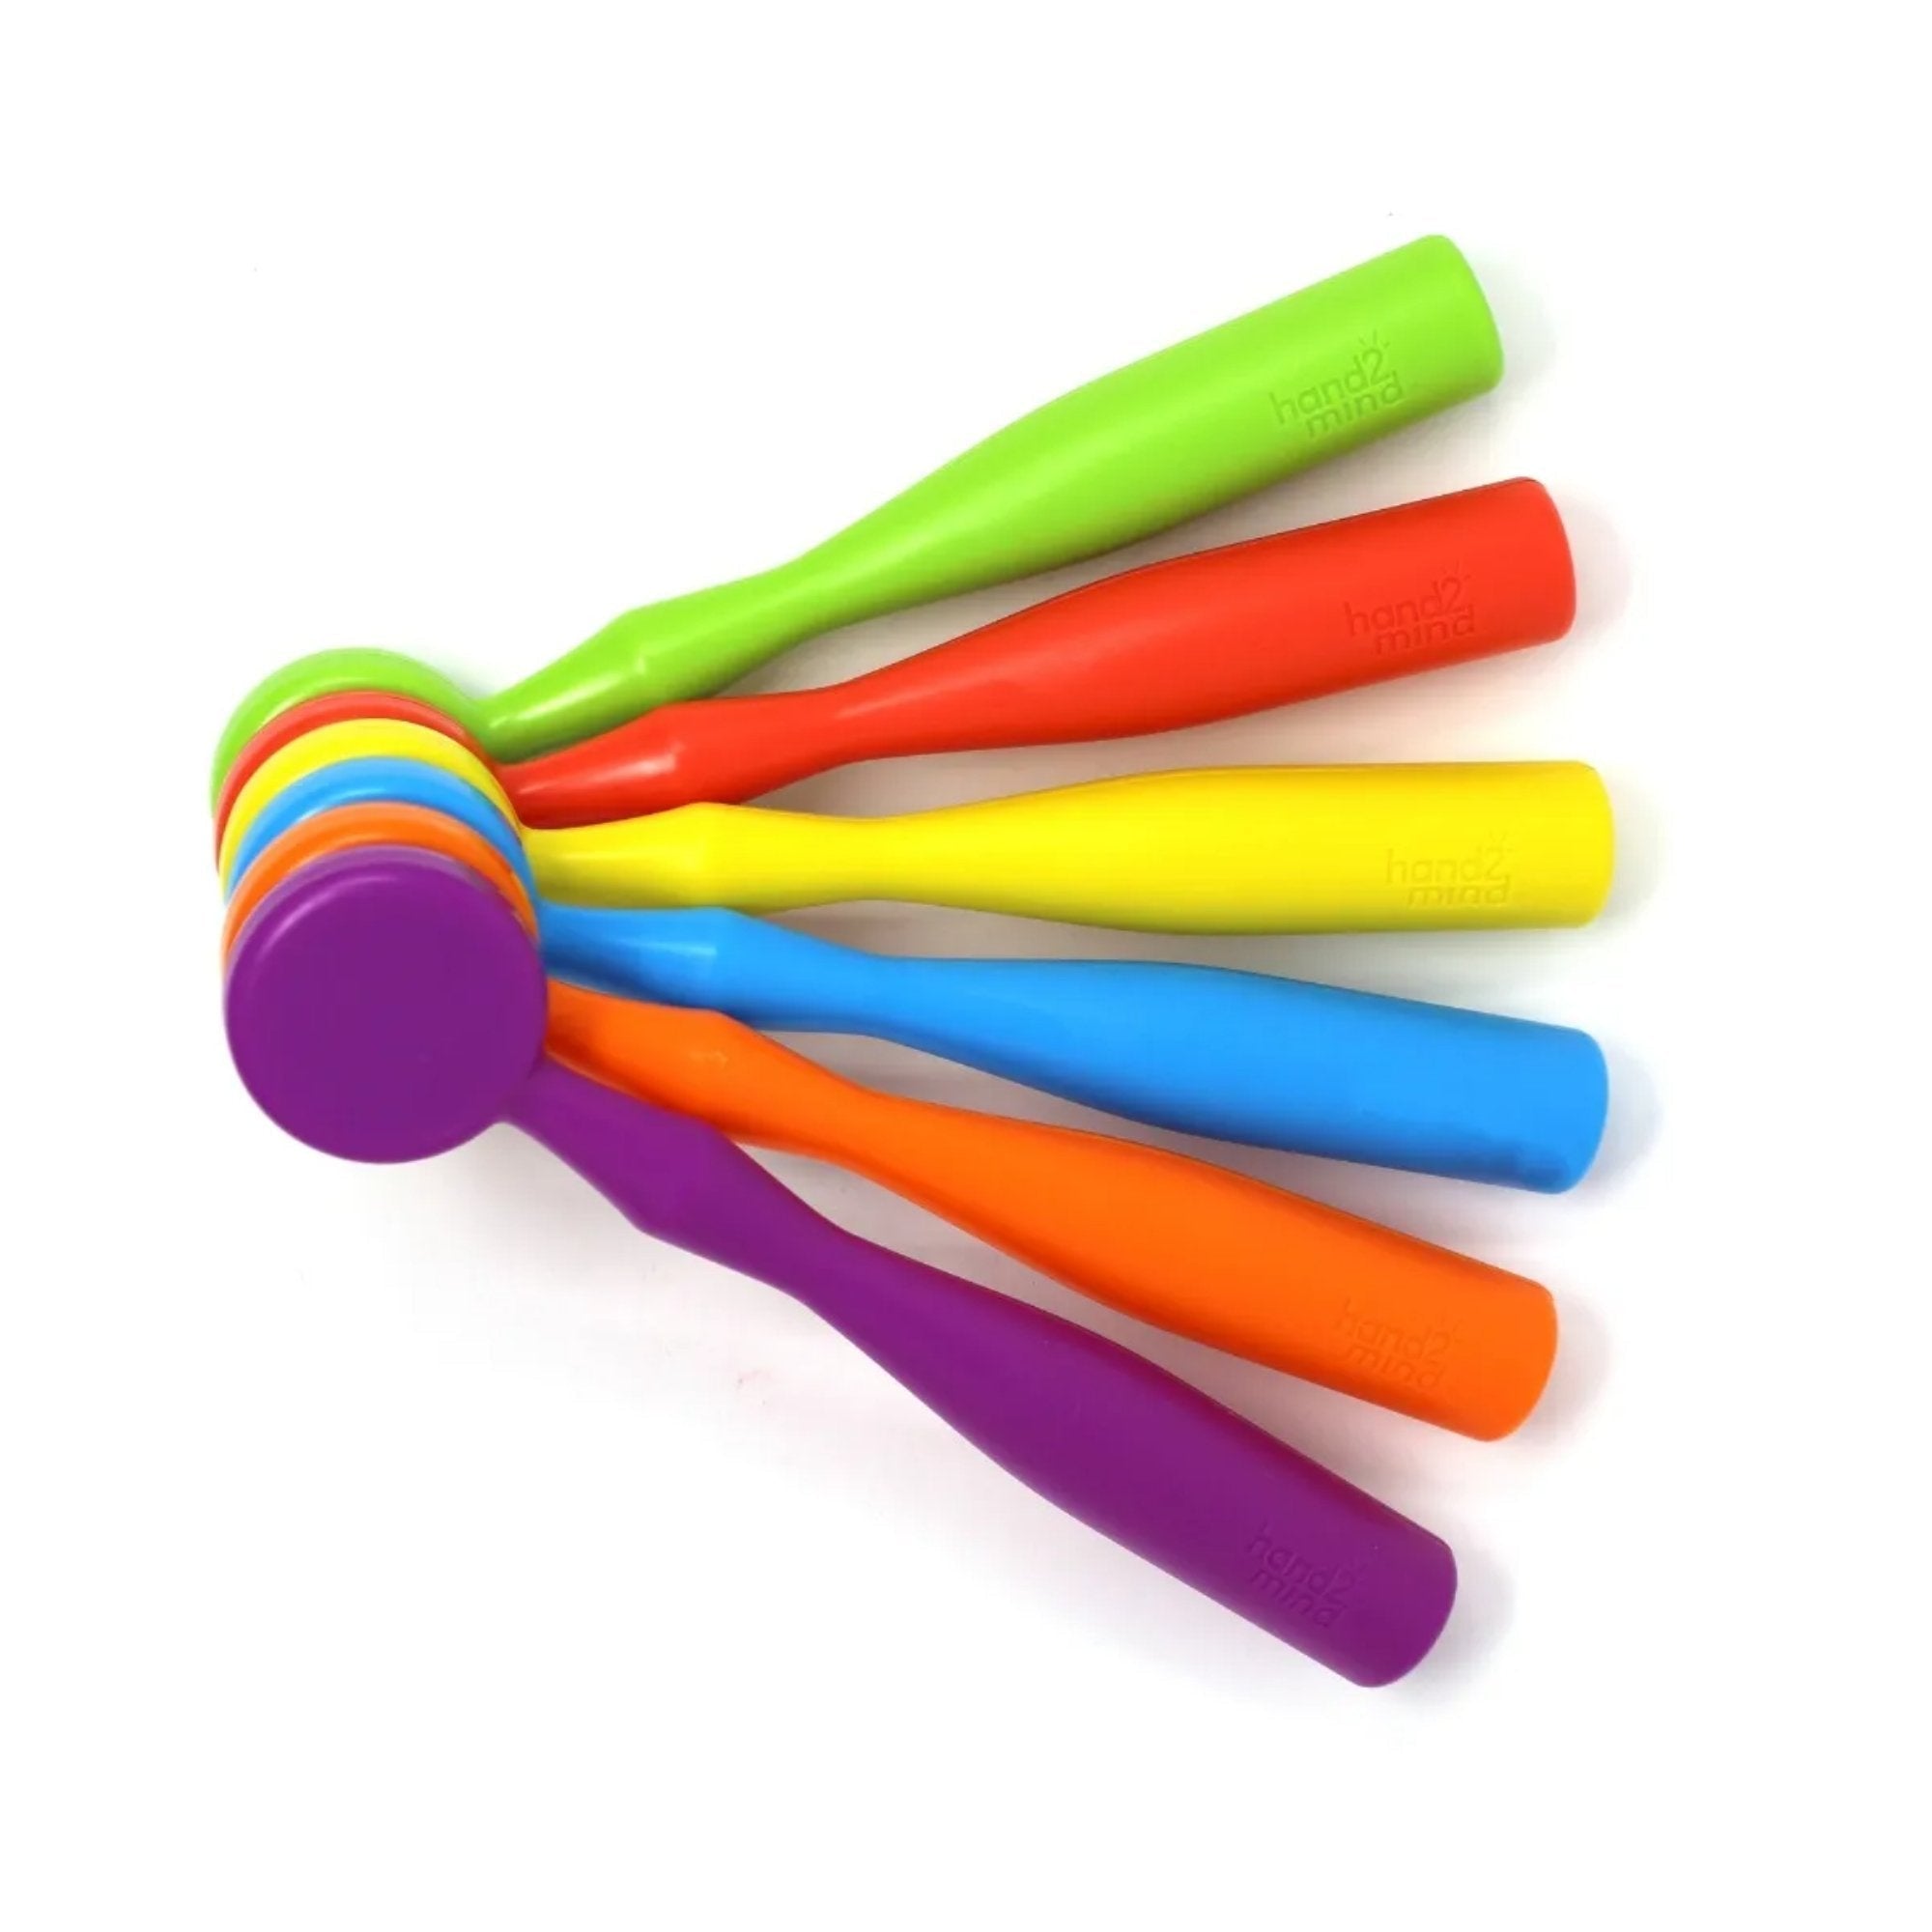 Colourful Magnetic Wands Set of 6, Use the Colourful Magnetic Wands in the classroom with the Lowercase Alphabet Counters (sold separately) for hands-on interactive early years literacy learning. The Colourful Magnetic Wands are easy for little hands to grip and can be used for a wide variety of activities including learning letters and building. The Colourful Magnetic Wands Set of 6 provide a multisensory approach to learning early literacy skills such as blending and segmenting sounds. Colourful Magnetic 